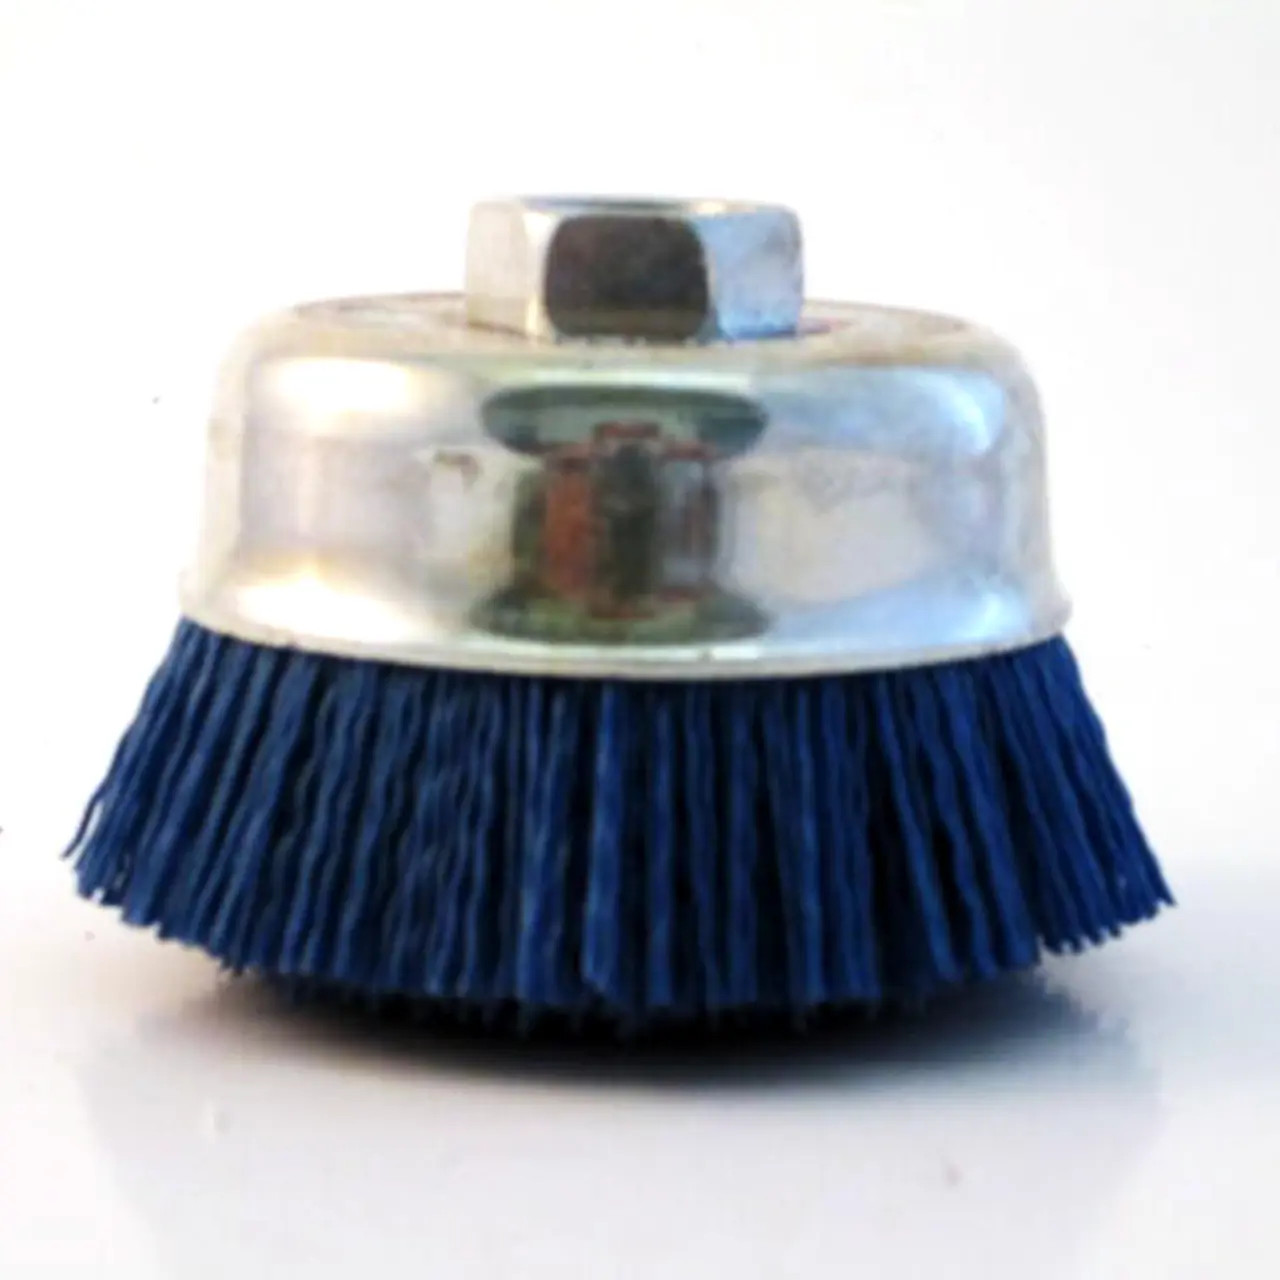 Dico Nyalox 3" Dia. Cup Brush Blue With 5/8-11 tpi Female Thread 240 Grit